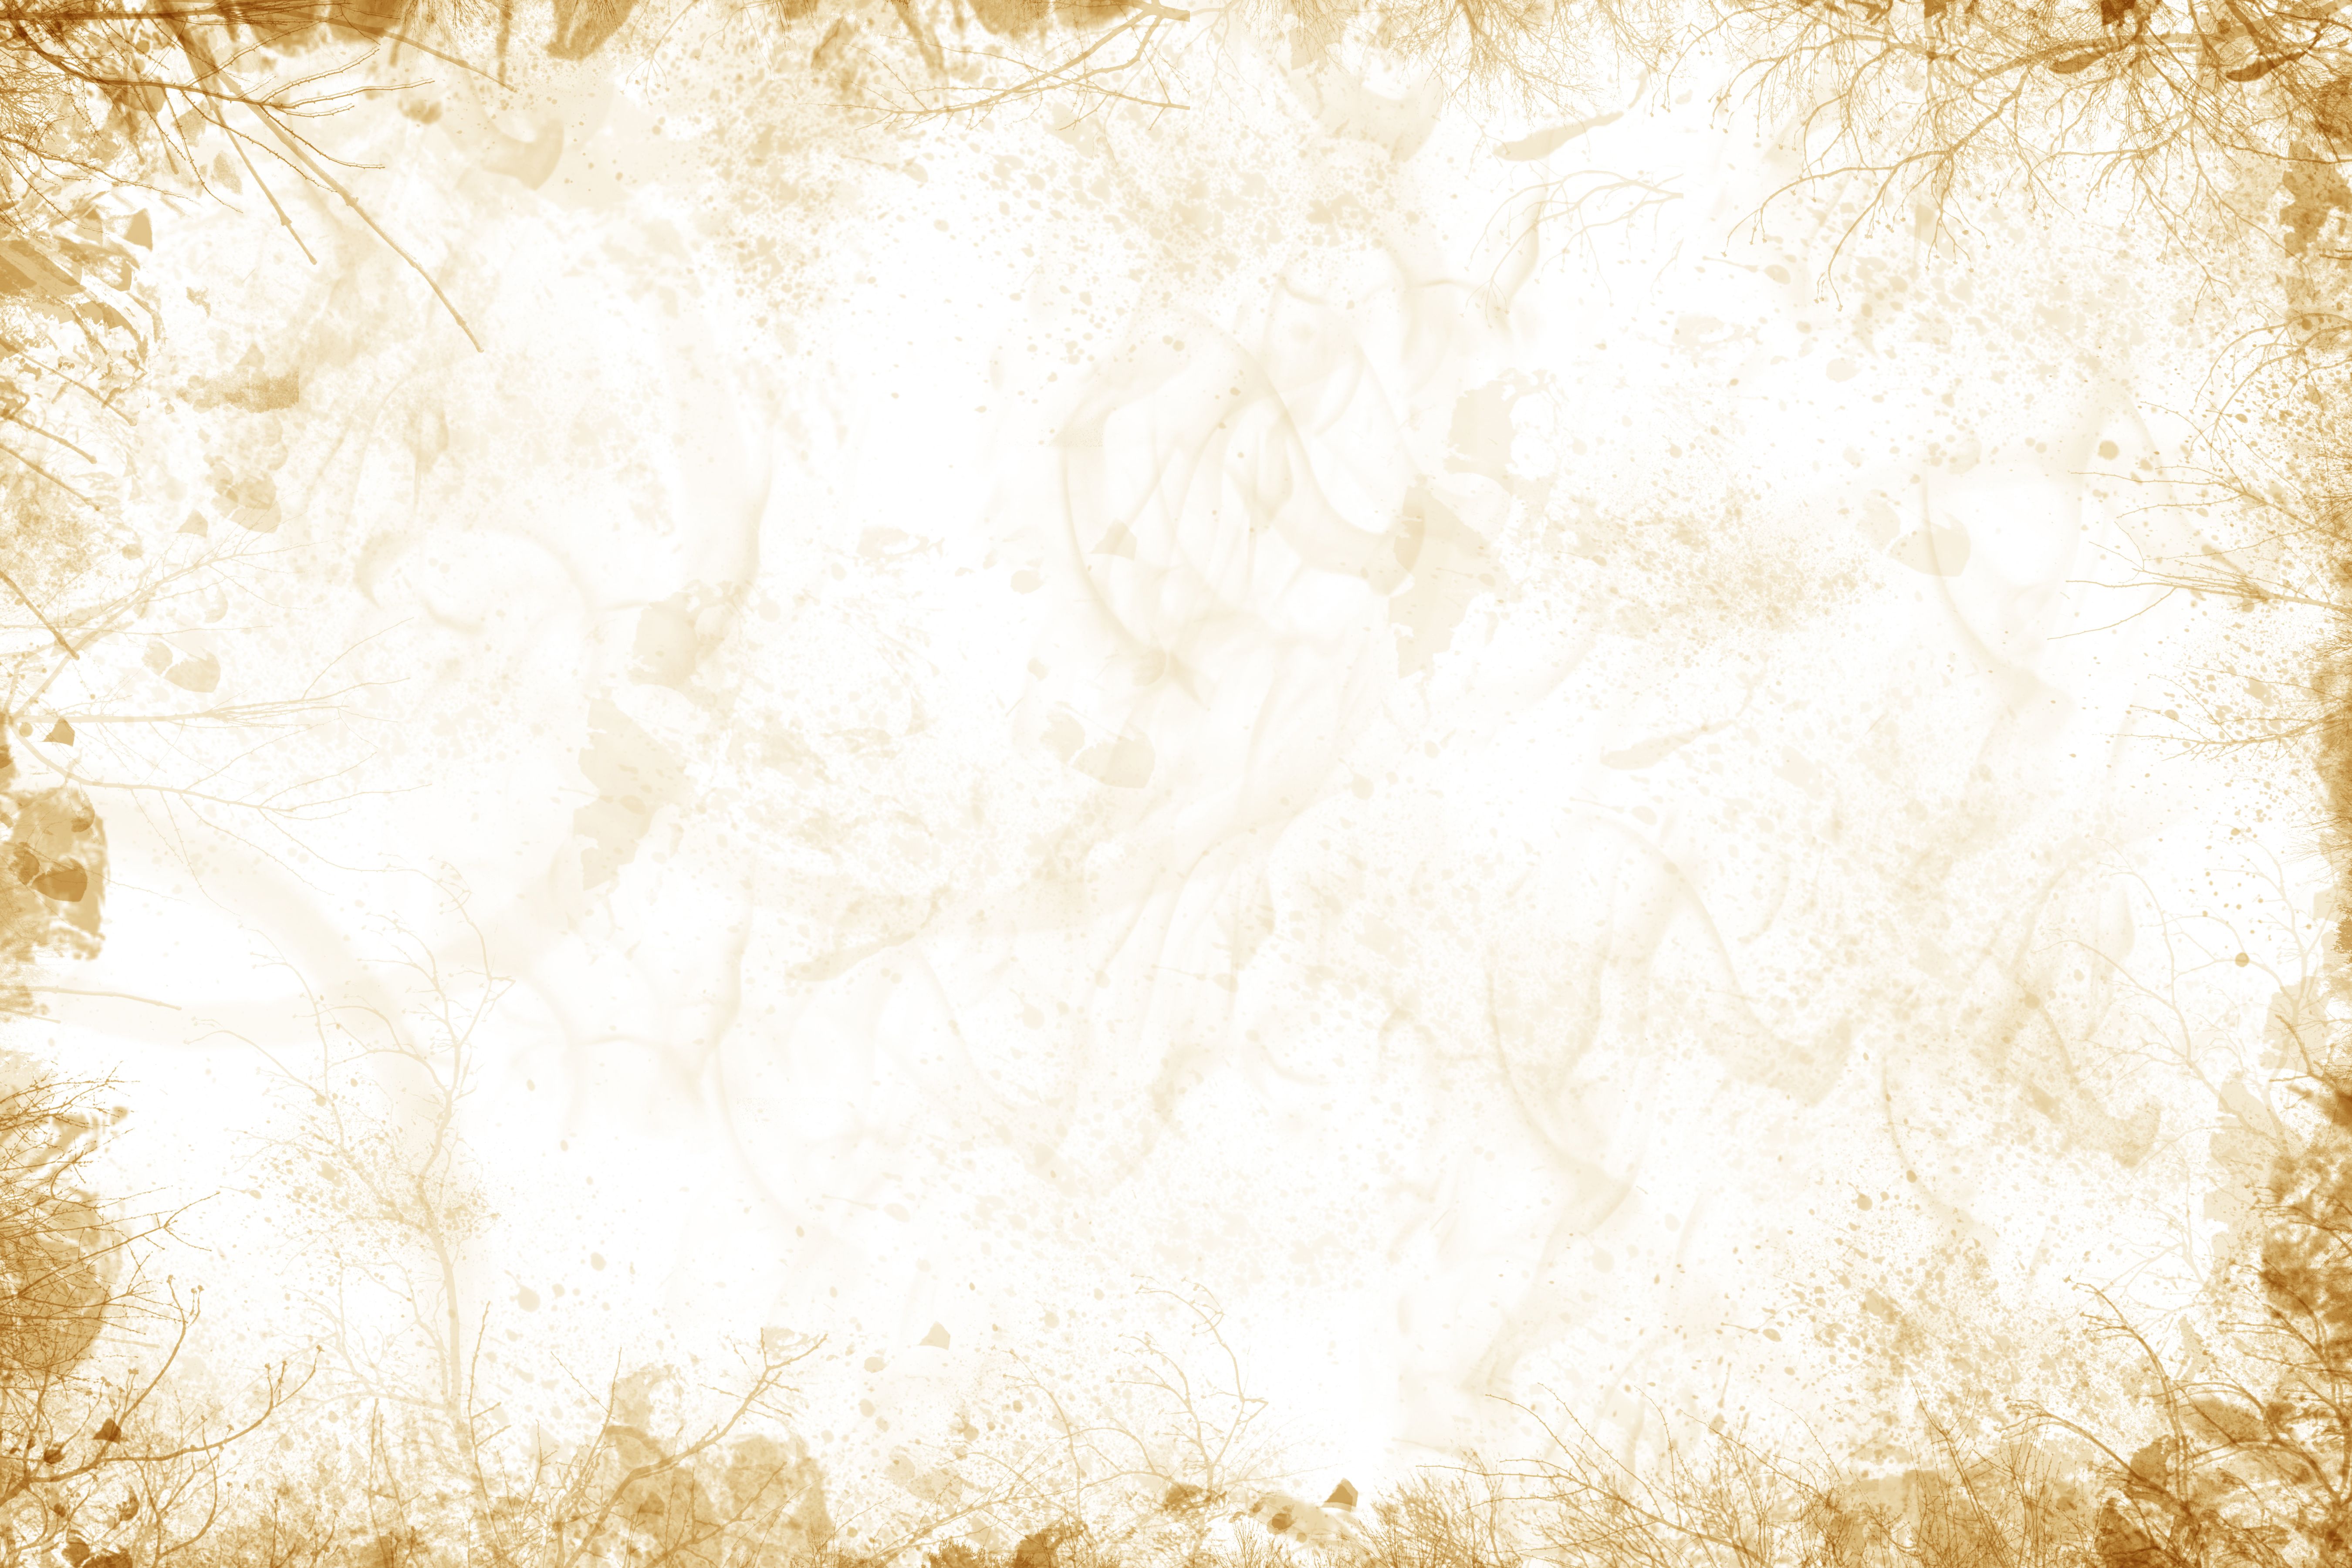 Texture Backgrounds   Funeral Prayer and Memorial Cards 5400x3600